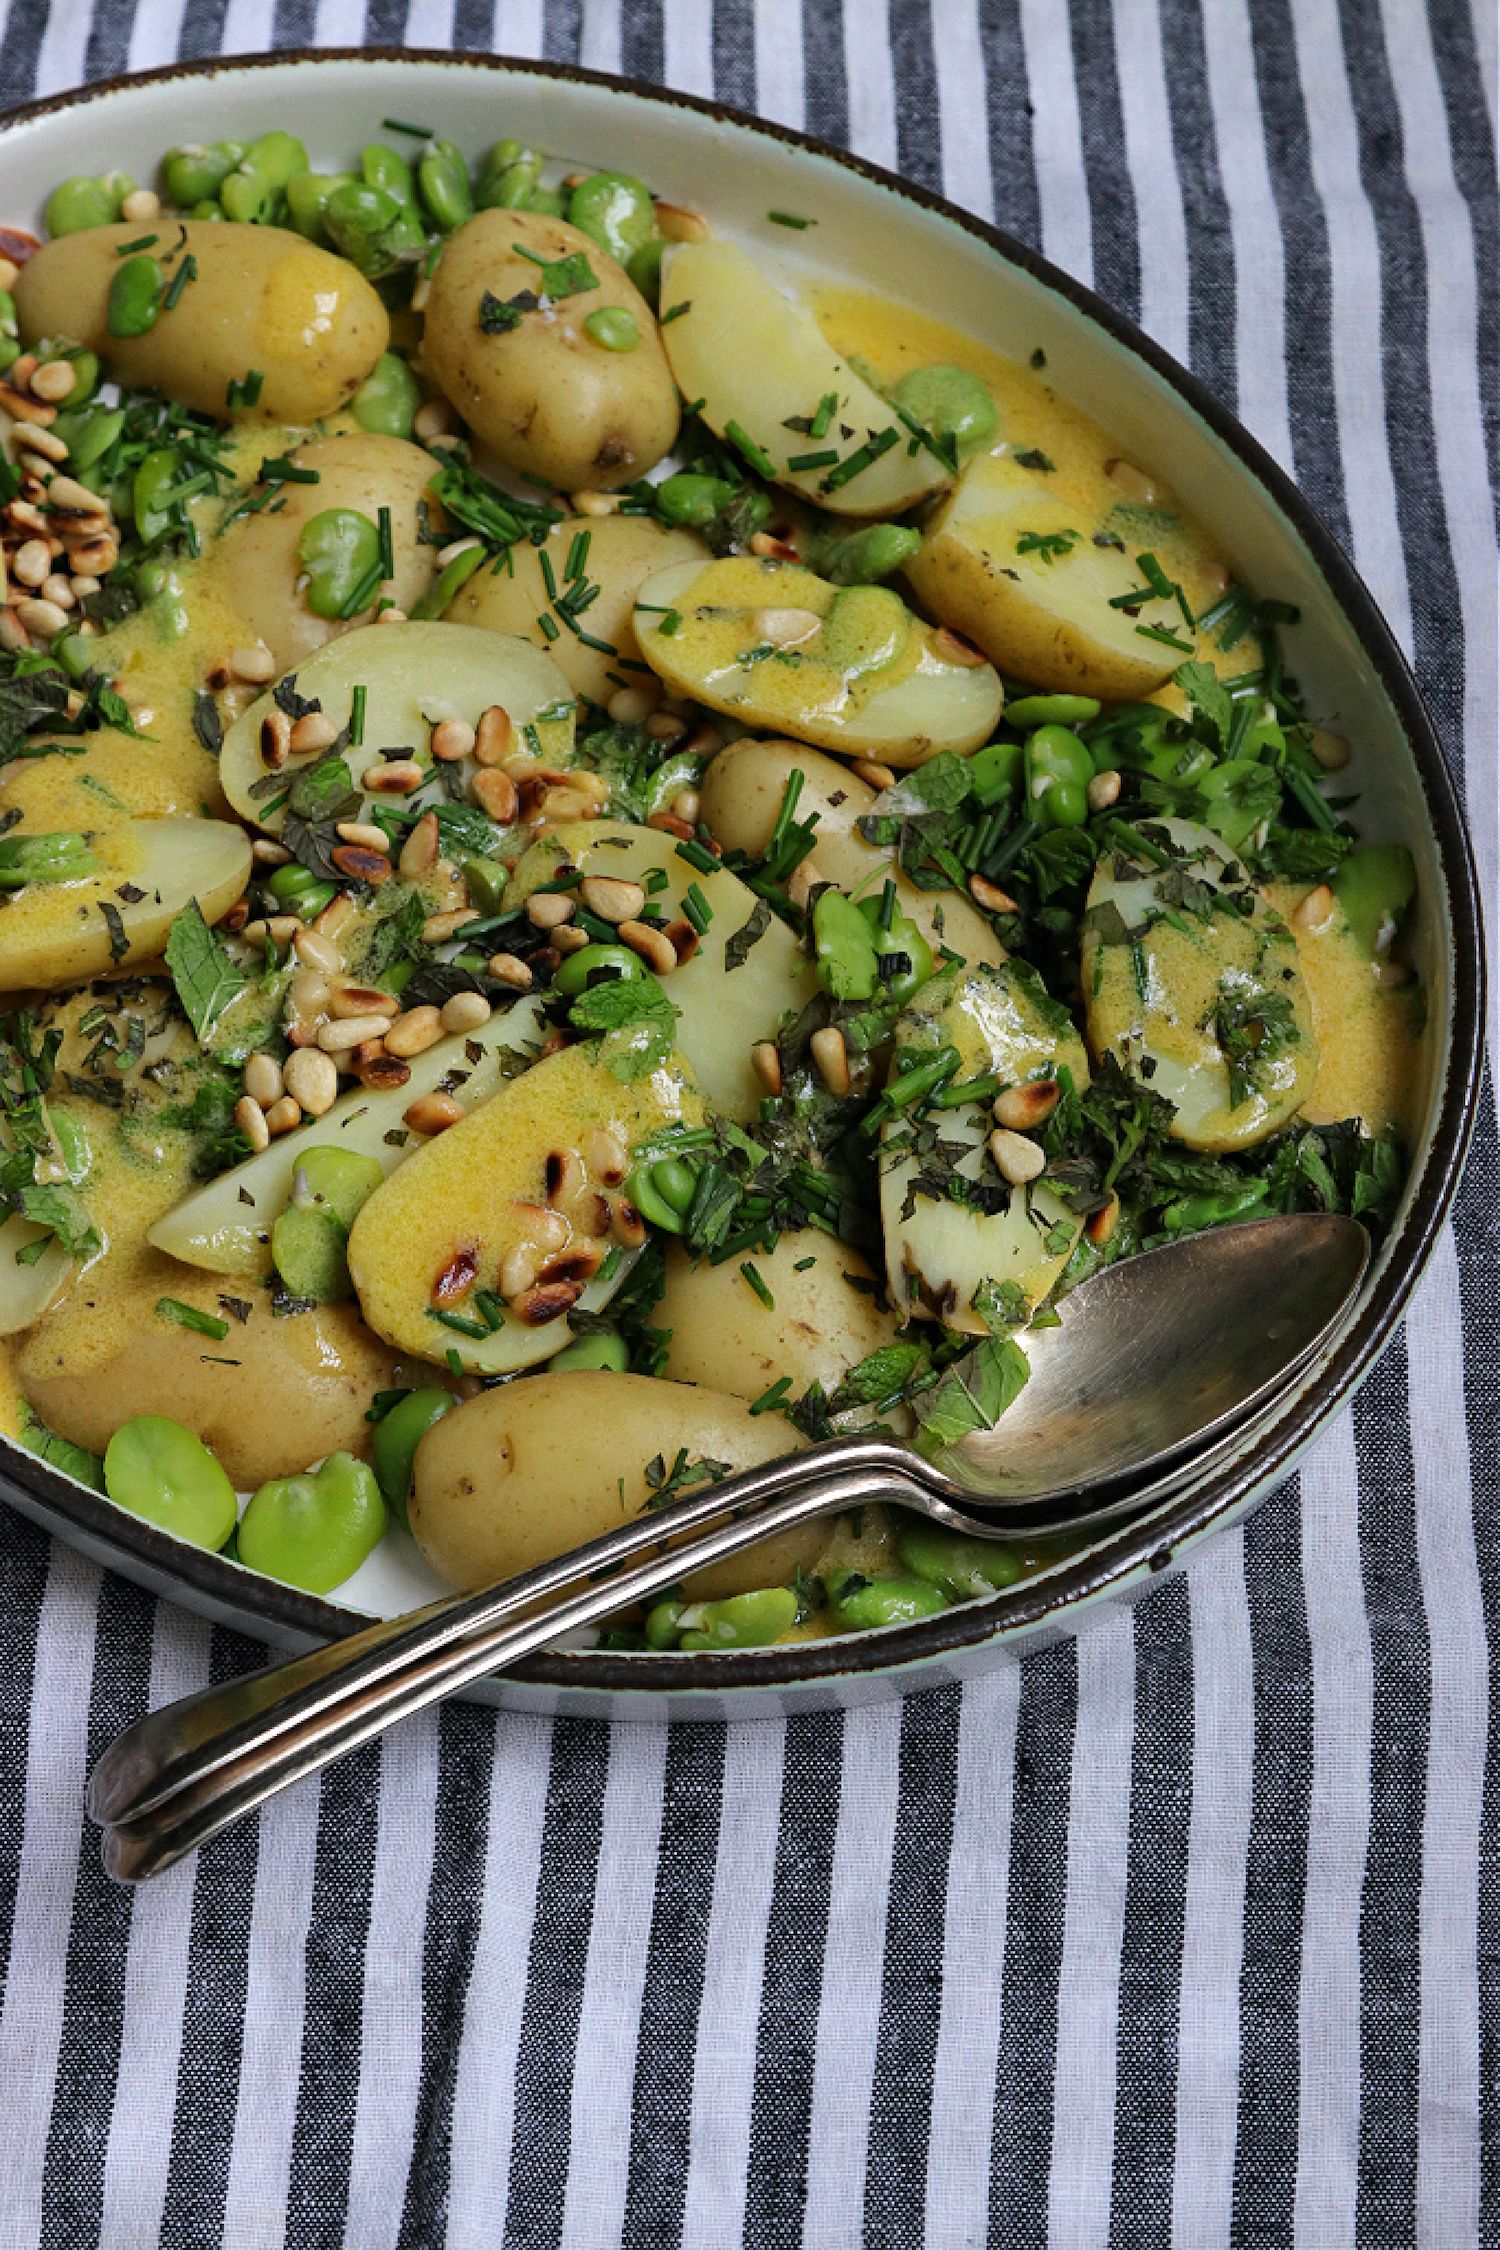 Recipe Notes - New Potatoes With Greens, Pine Nuts And Mustard Dressing - Humphrey Munson